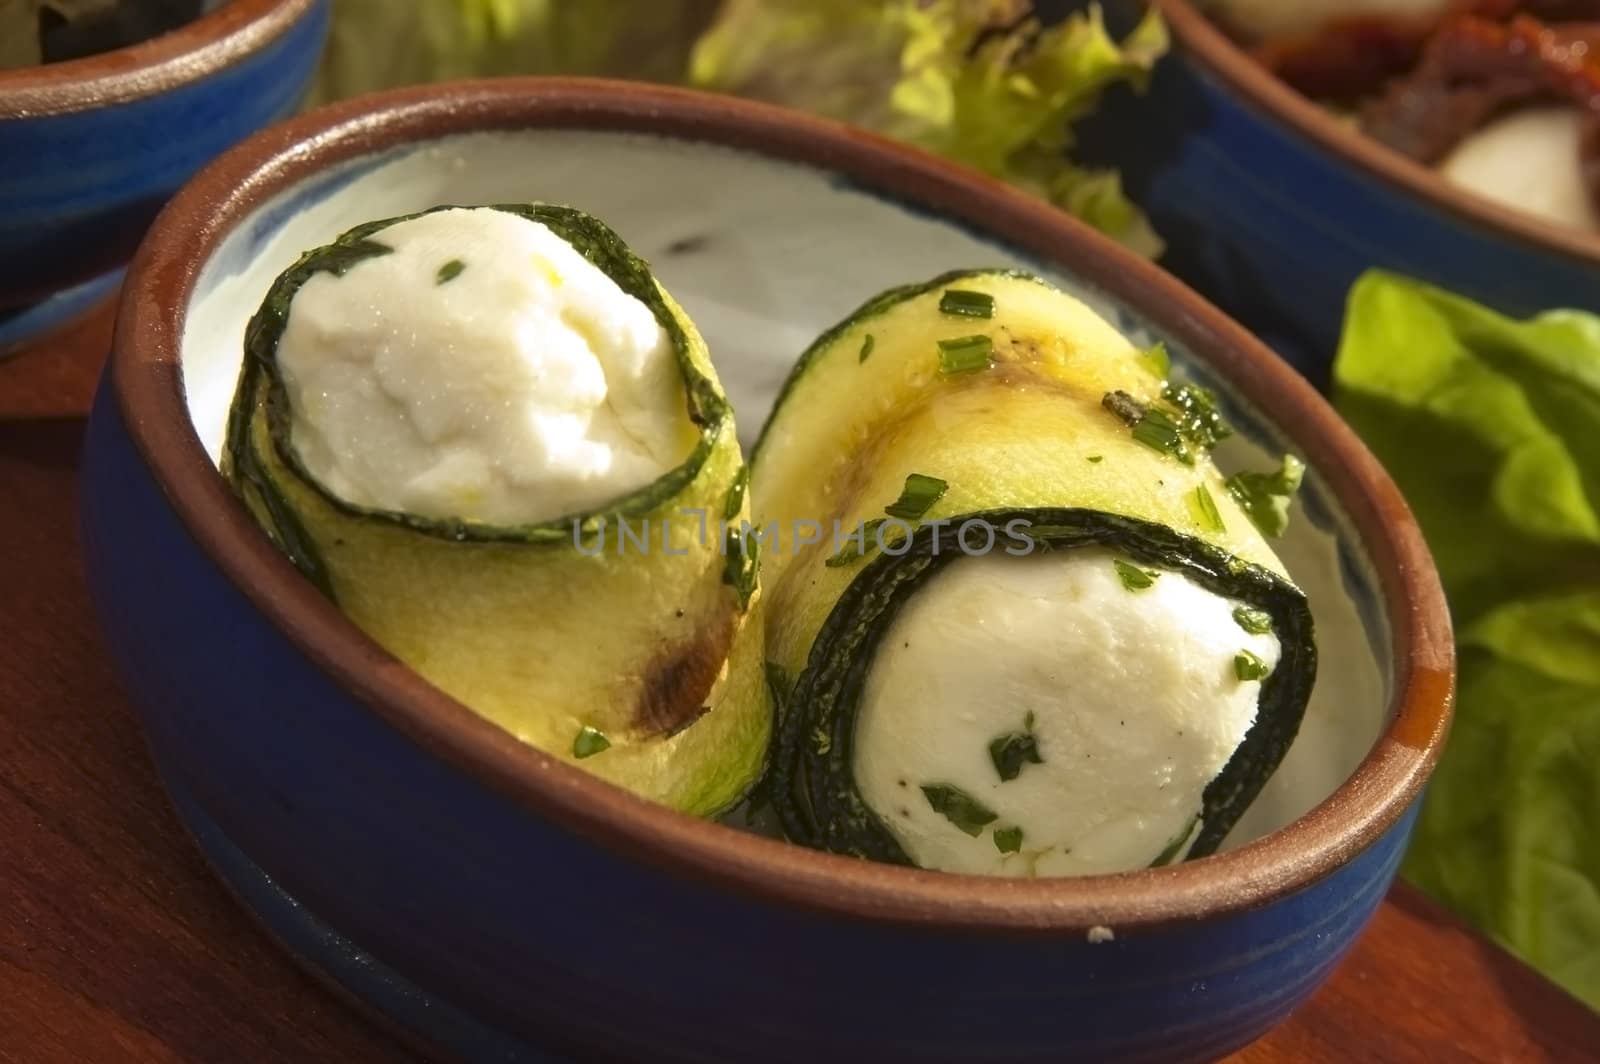 Courgette filled by the fetta cheese by hanusst